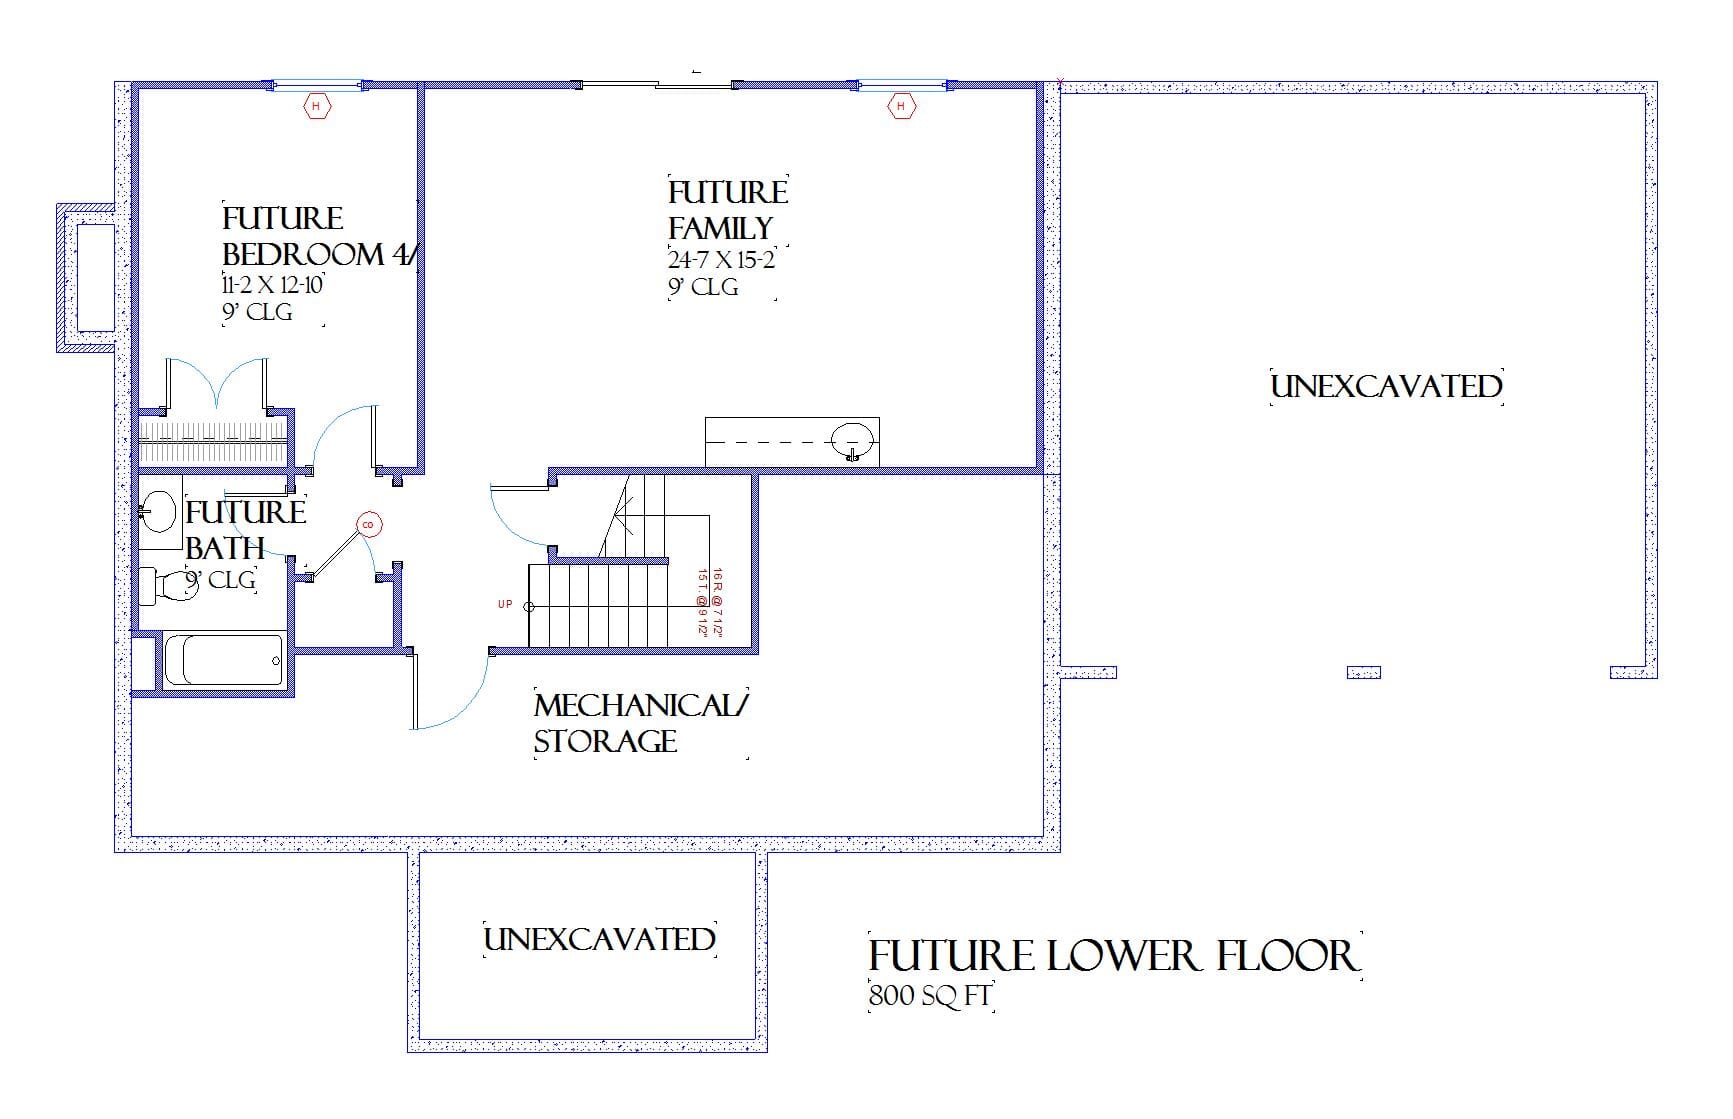 Durham - Home Design and Floor Plan - SketchPad House Plans